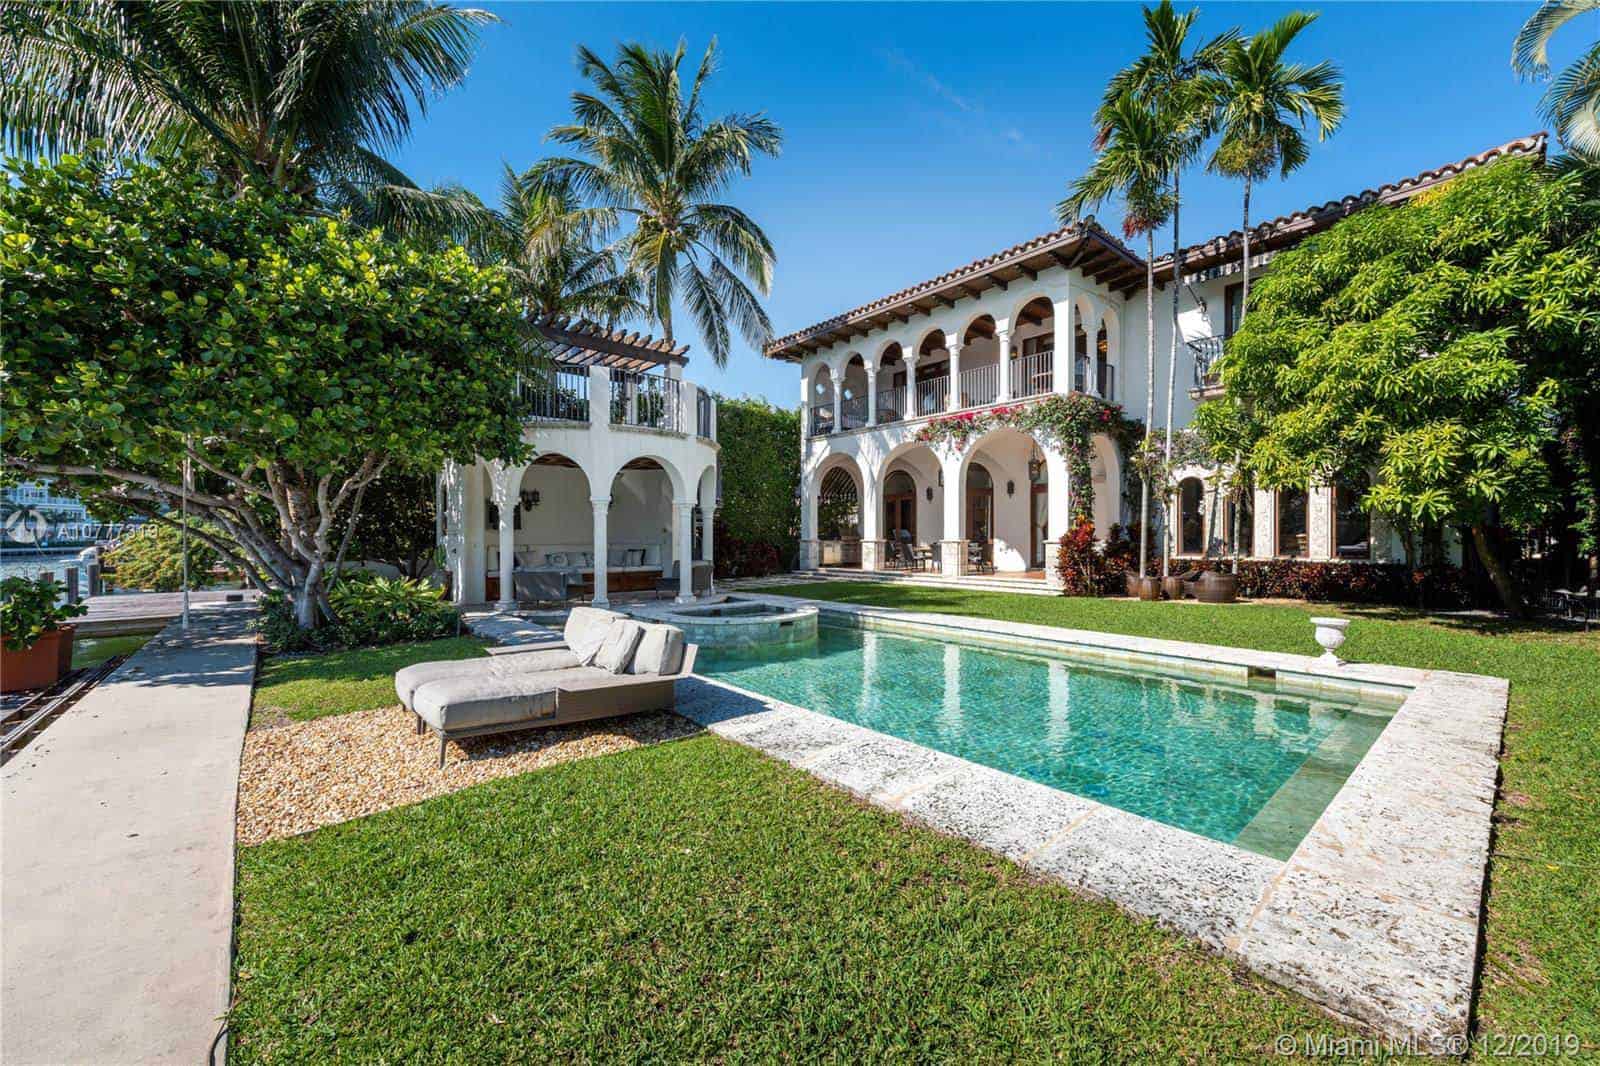 714 LAKEVIEW DR, MIAMI BEACH, FL 33140: Ultra-Luxury Homes for Sale in Miami Beach